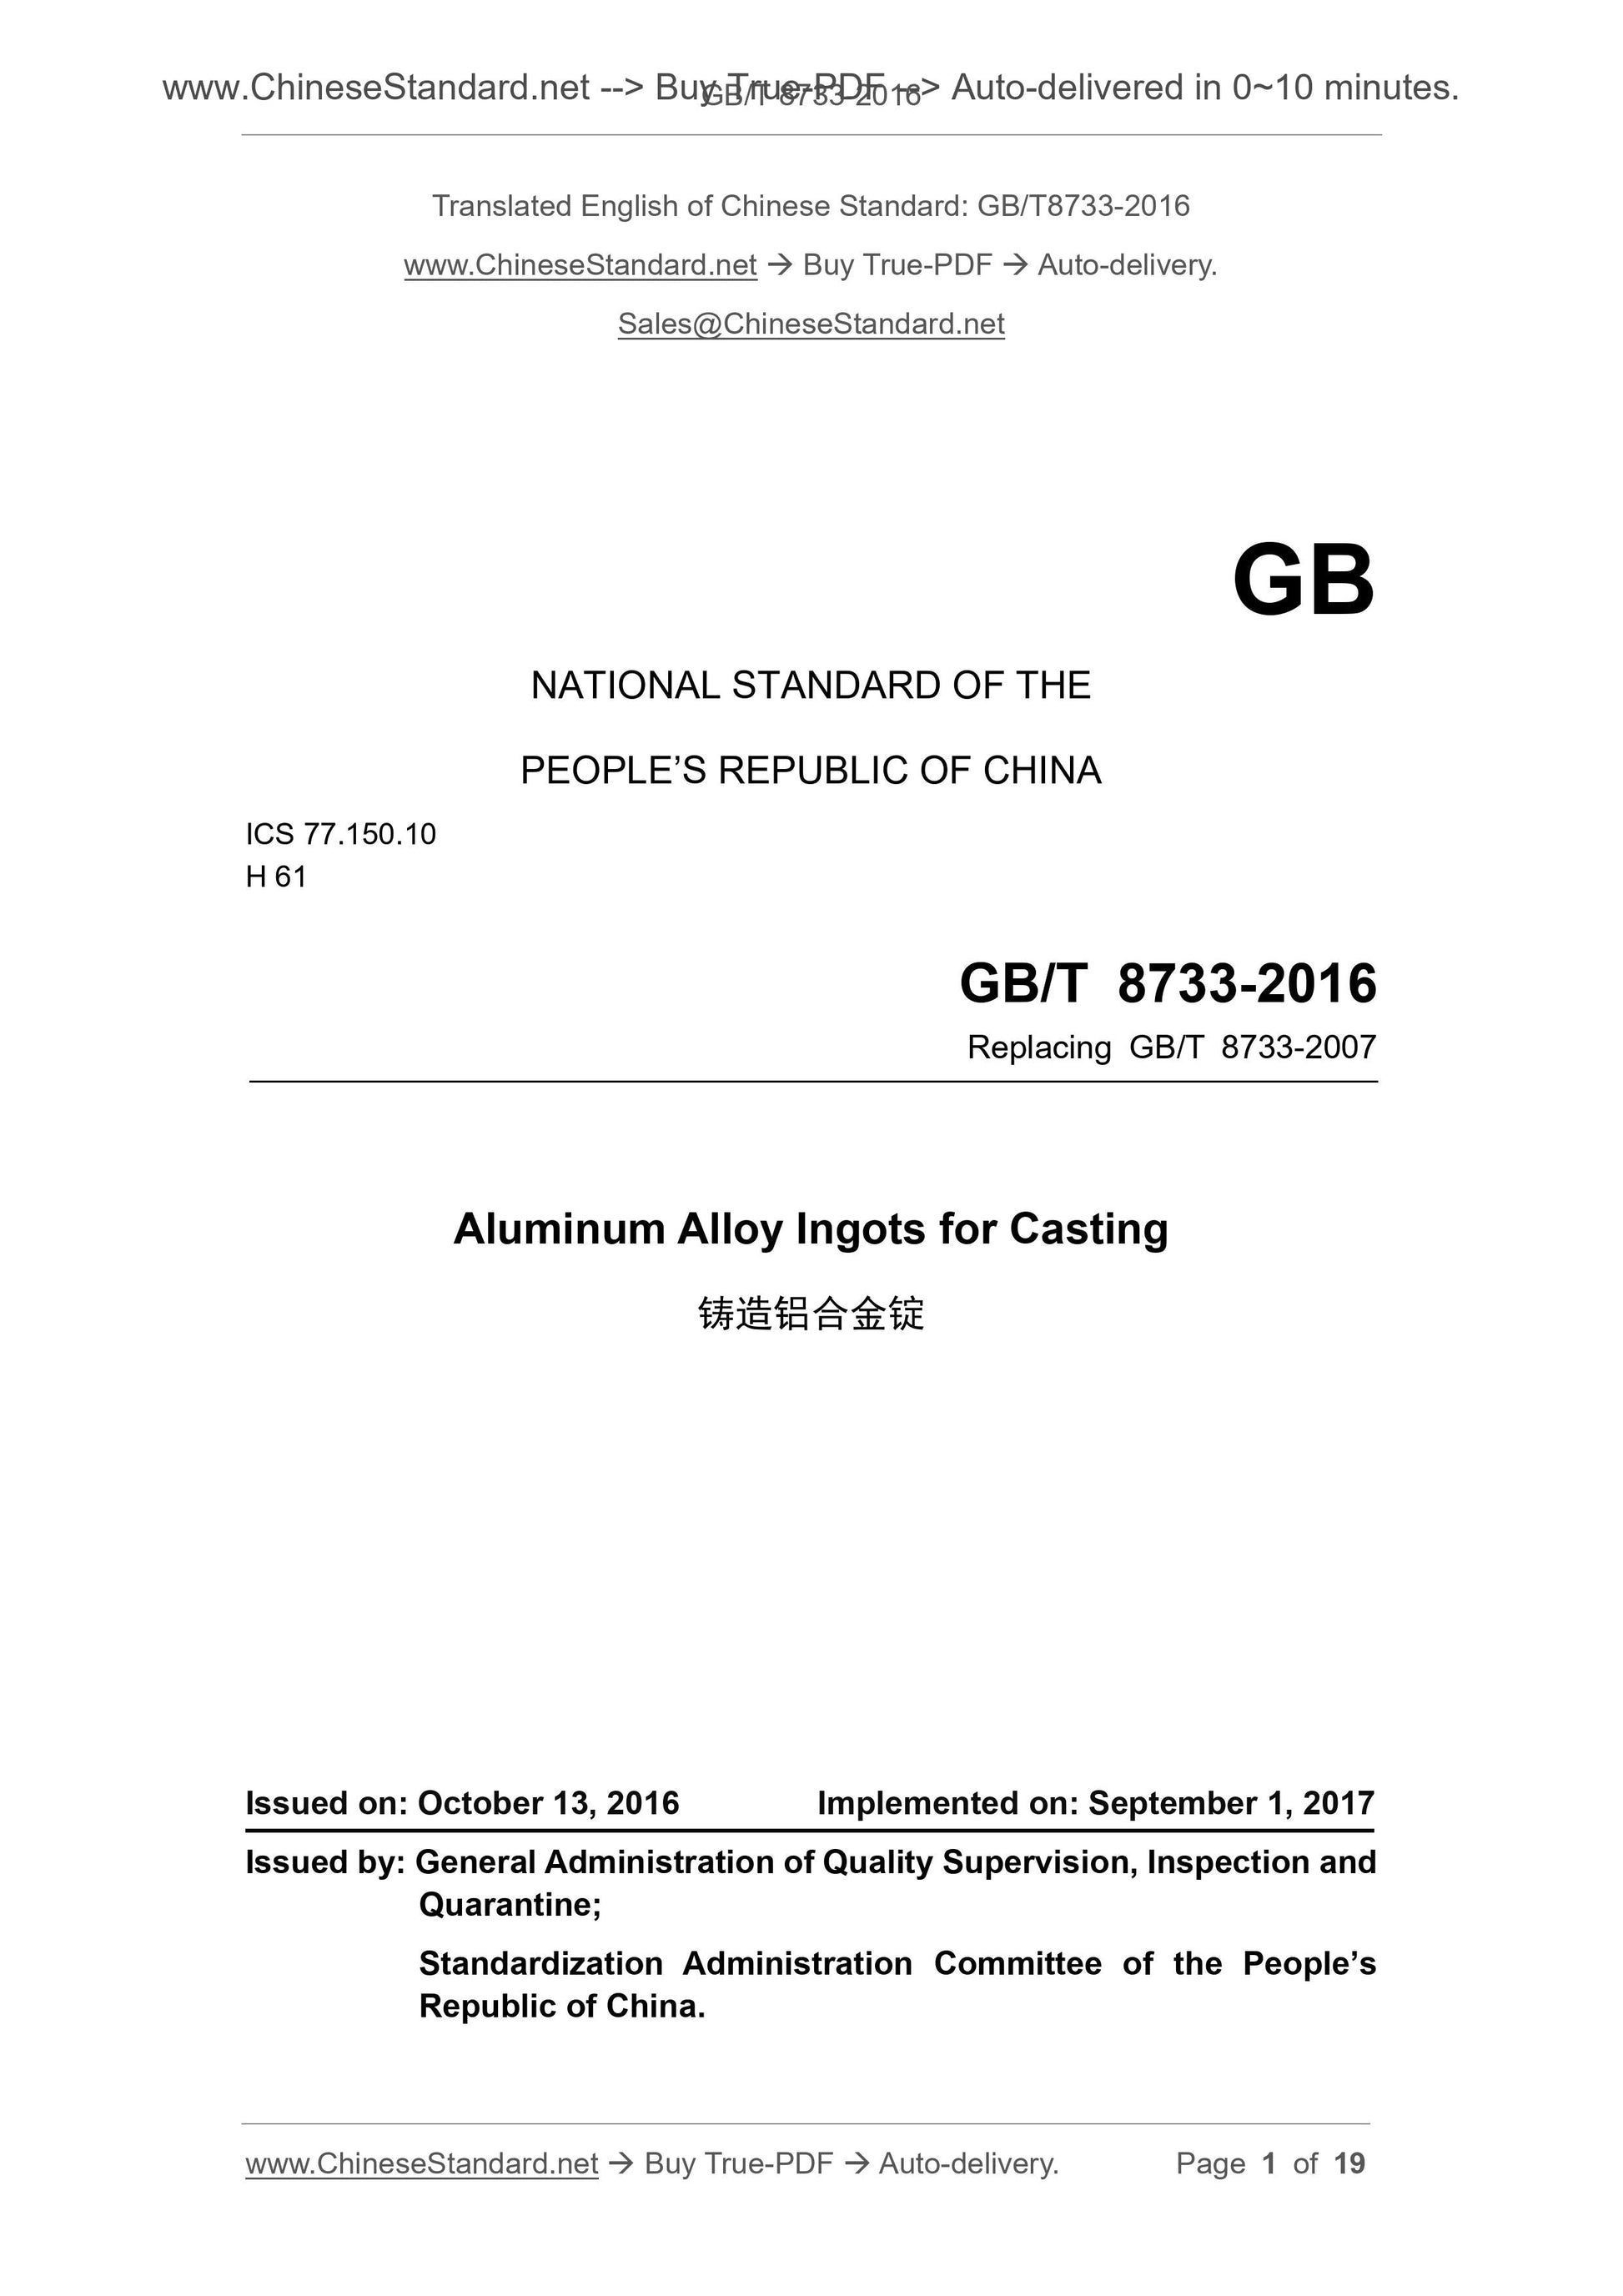 GB/T 8733-2016 Page 1